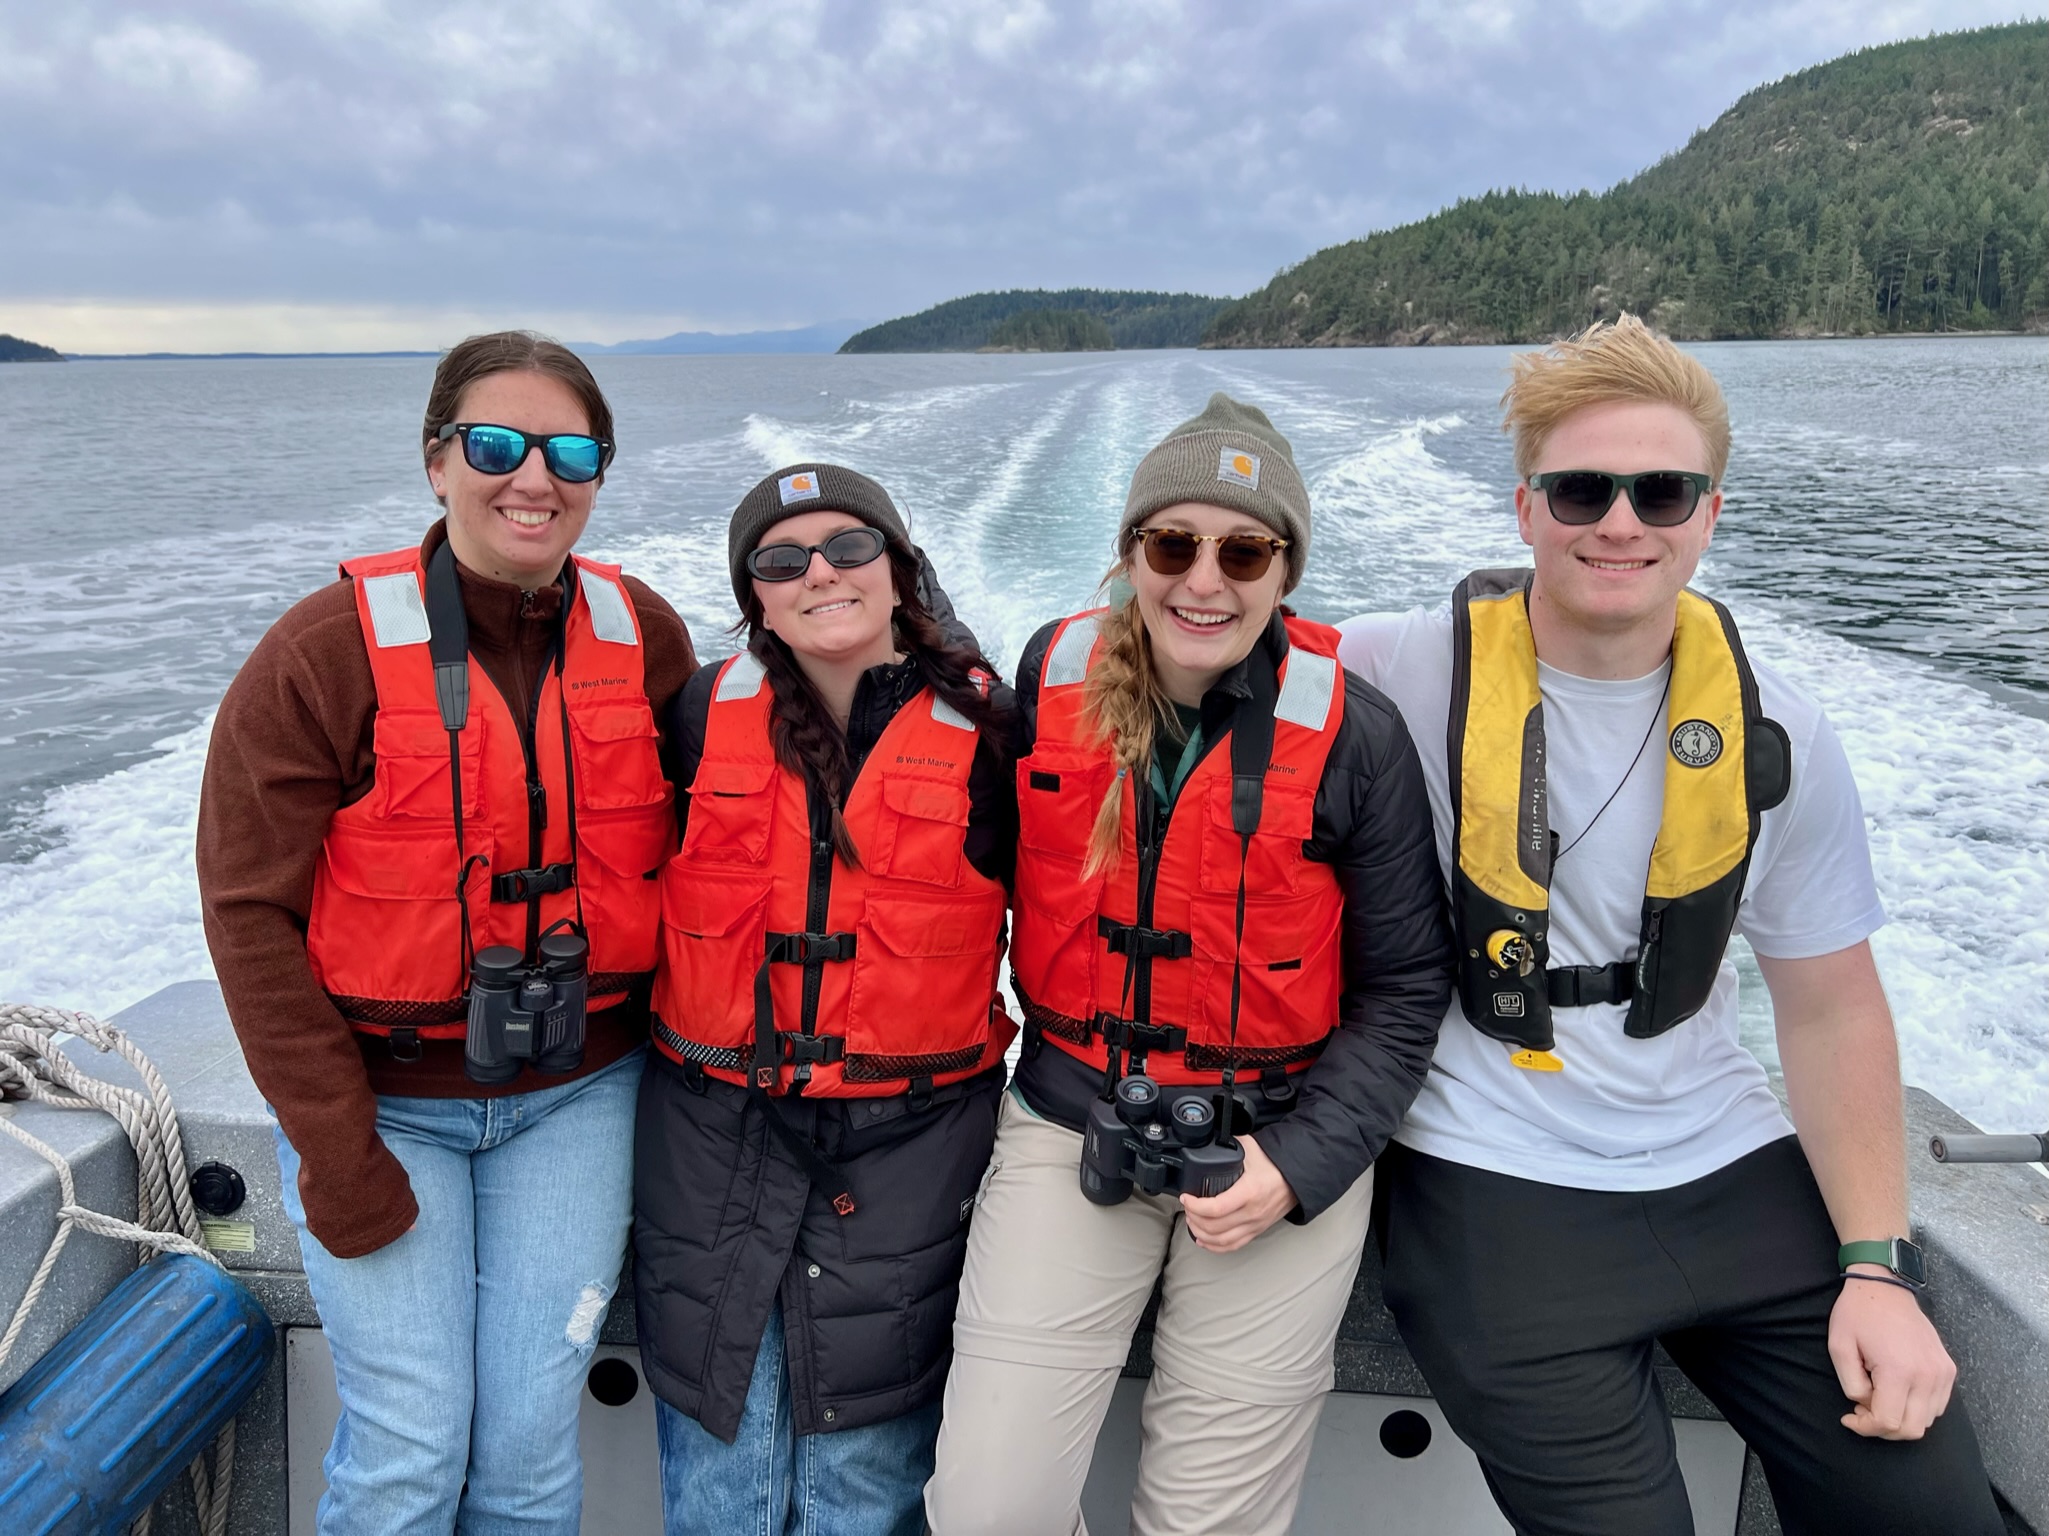 Four student researchers wearing bright life vests ride in a boat. Islands are visible in the background